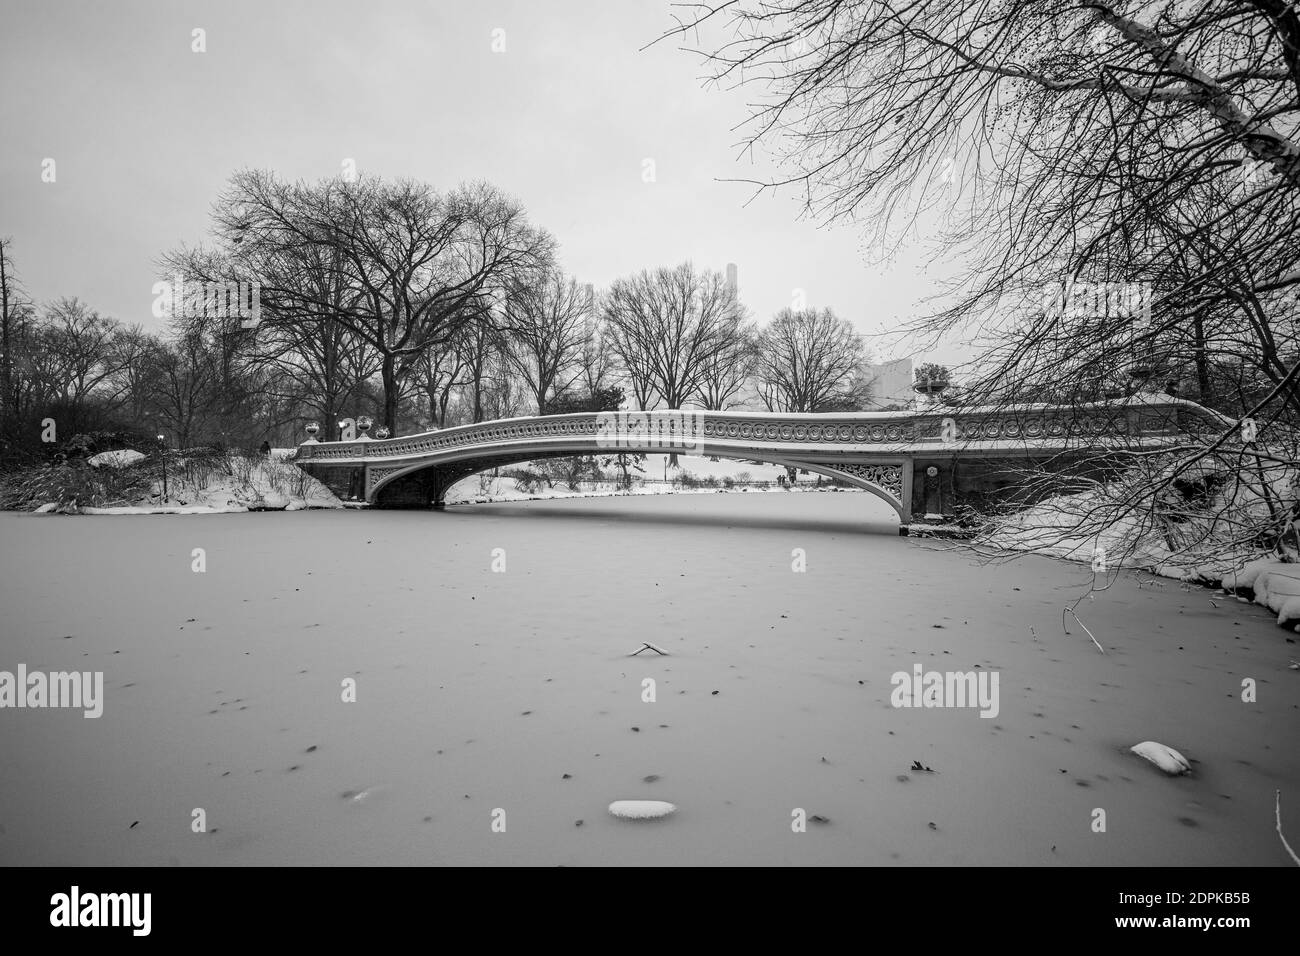 A Bow Bridge is covered in snow near the Lake in Central Park, New York City Stock Photo